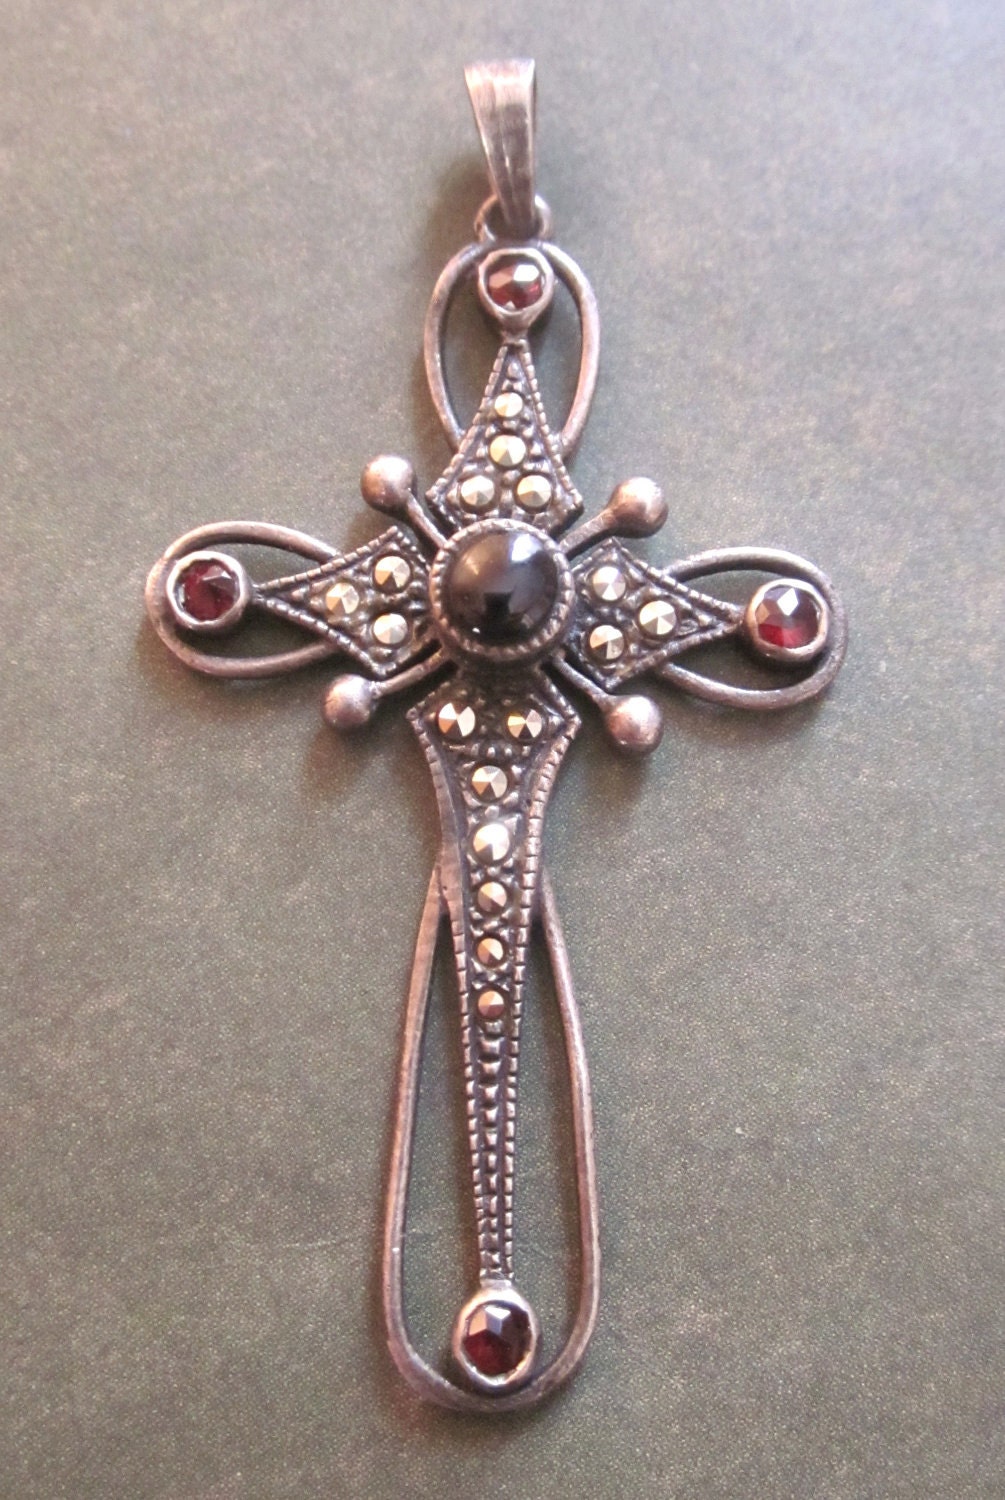 Vintage Sterling Silver Cross Pendant with Garnet and